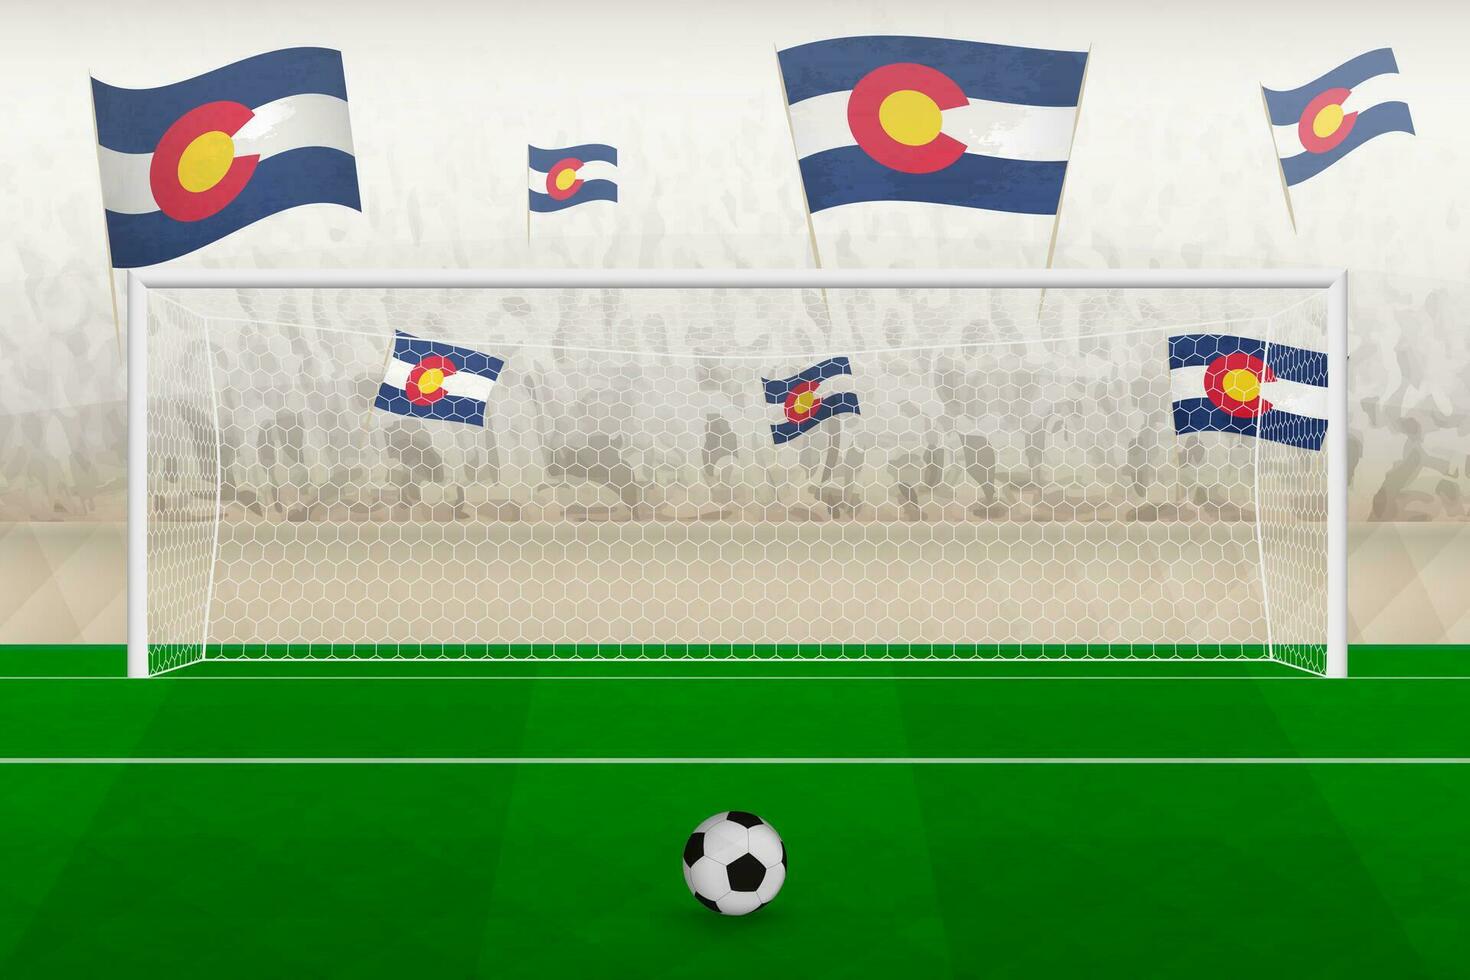 Colorado football team fans with flags of Colorado cheering on stadium, penalty kick concept in a soccer match. vector